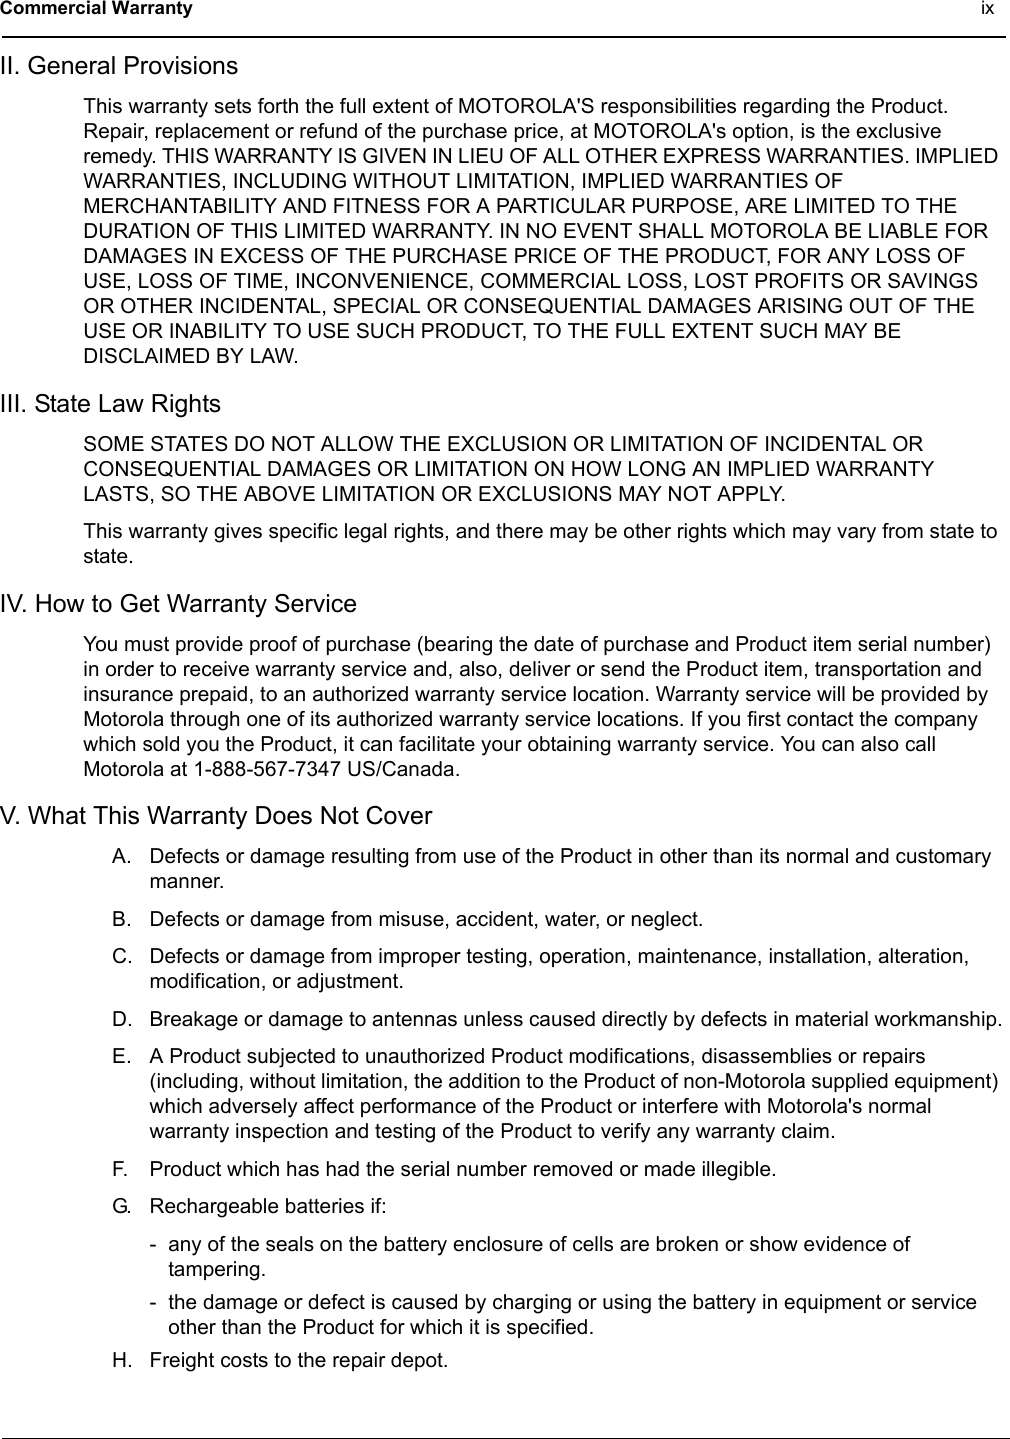 Commercial Warranty ixII. General ProvisionsThis warranty sets forth the full extent of MOTOROLA&apos;S responsibilities regarding the Product. Repair, replacement or refund of the purchase price, at MOTOROLA&apos;s option, is the exclusive remedy. THIS WARRANTY IS GIVEN IN LIEU OF ALL OTHER EXPRESS WARRANTIES. IMPLIED WARRANTIES, INCLUDING WITHOUT LIMITATION, IMPLIED WARRANTIES OF MERCHANTABILITY AND FITNESS FOR A PARTICULAR PURPOSE, ARE LIMITED TO THE DURATION OF THIS LIMITED WARRANTY. IN NO EVENT SHALL MOTOROLA BE LIABLE FOR DAMAGES IN EXCESS OF THE PURCHASE PRICE OF THE PRODUCT, FOR ANY LOSS OF USE, LOSS OF TIME, INCONVENIENCE, COMMERCIAL LOSS, LOST PROFITS OR SAVINGS OR OTHER INCIDENTAL, SPECIAL OR CONSEQUENTIAL DAMAGES ARISING OUT OF THE USE OR INABILITY TO USE SUCH PRODUCT, TO THE FULL EXTENT SUCH MAY BE DISCLAIMED BY LAW.III. State Law RightsSOME STATES DO NOT ALLOW THE EXCLUSION OR LIMITATION OF INCIDENTAL OR CONSEQUENTIAL DAMAGES OR LIMITATION ON HOW LONG AN IMPLIED WARRANTY LASTS, SO THE ABOVE LIMITATION OR EXCLUSIONS MAY NOT APPLY.This warranty gives specific legal rights, and there may be other rights which may vary from state to state.IV. How to Get Warranty ServiceYou must provide proof of purchase (bearing the date of purchase and Product item serial number) in order to receive warranty service and, also, deliver or send the Product item, transportation and insurance prepaid, to an authorized warranty service location. Warranty service will be provided by Motorola through one of its authorized warranty service locations. If you first contact the company which sold you the Product, it can facilitate your obtaining warranty service. You can also call Motorola at 1-888-567-7347 US/Canada.V. What This Warranty Does Not CoverA. Defects or damage resulting from use of the Product in other than its normal and customary manner.B. Defects or damage from misuse, accident, water, or neglect.C. Defects or damage from improper testing, operation, maintenance, installation, alteration, modification, or adjustment.D. Breakage or damage to antennas unless caused directly by defects in material workmanship.E. A Product subjected to unauthorized Product modifications, disassemblies or repairs (including, without limitation, the addition to the Product of non-Motorola supplied equipment) which adversely affect performance of the Product or interfere with Motorola&apos;s normal warranty inspection and testing of the Product to verify any warranty claim.F. Product which has had the serial number removed or made illegible.G. Rechargeable batteries if:- any of the seals on the battery enclosure of cells are broken or show evidence of tampering.- the damage or defect is caused by charging or using the battery in equipment or service other than the Product for which it is specified.H. Freight costs to the repair depot.